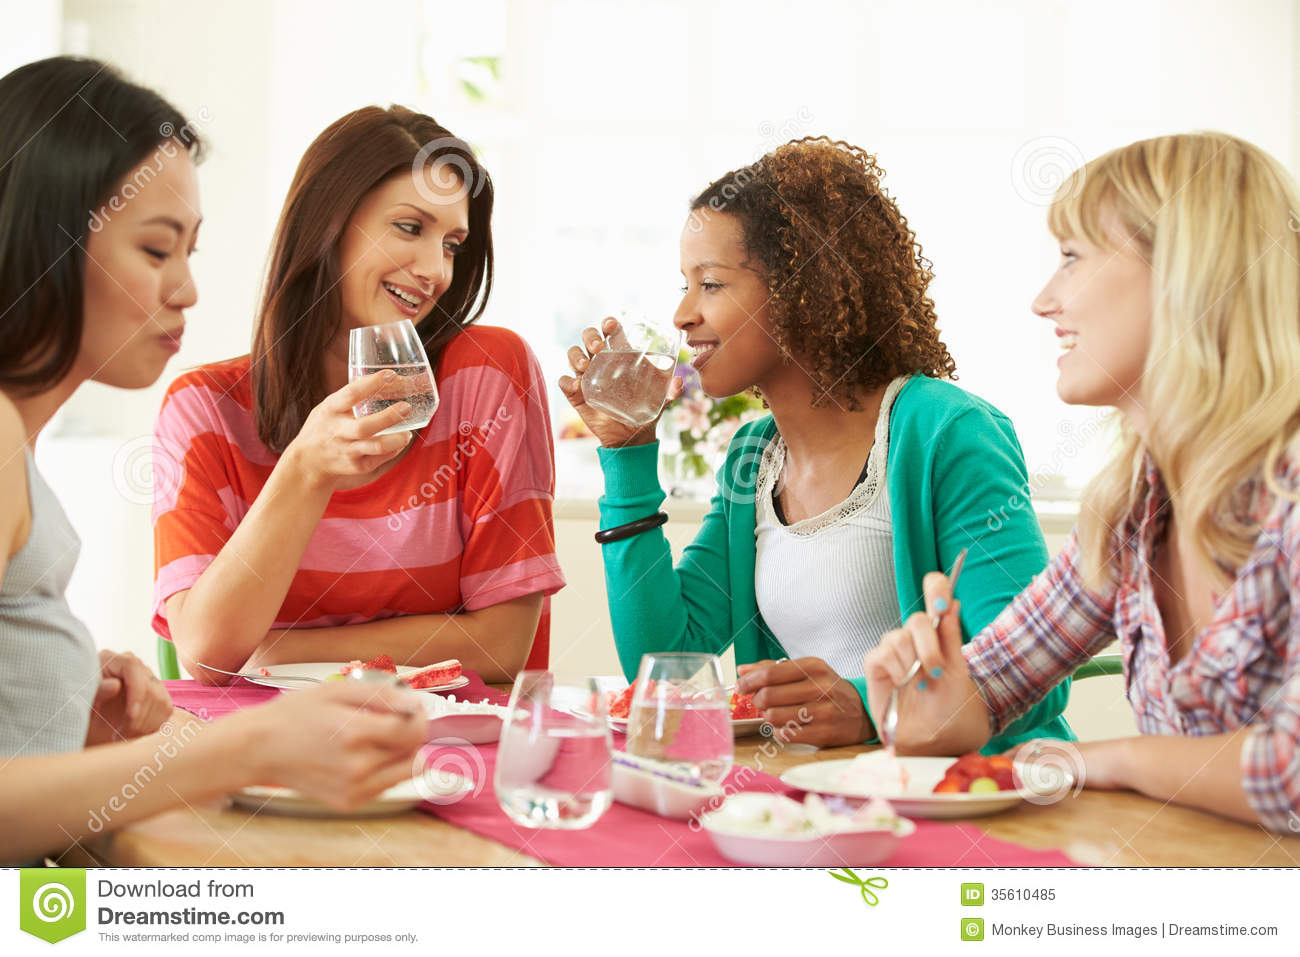 Group Of Women Sitting Around Table Eating Dessert Royalty Free Stock